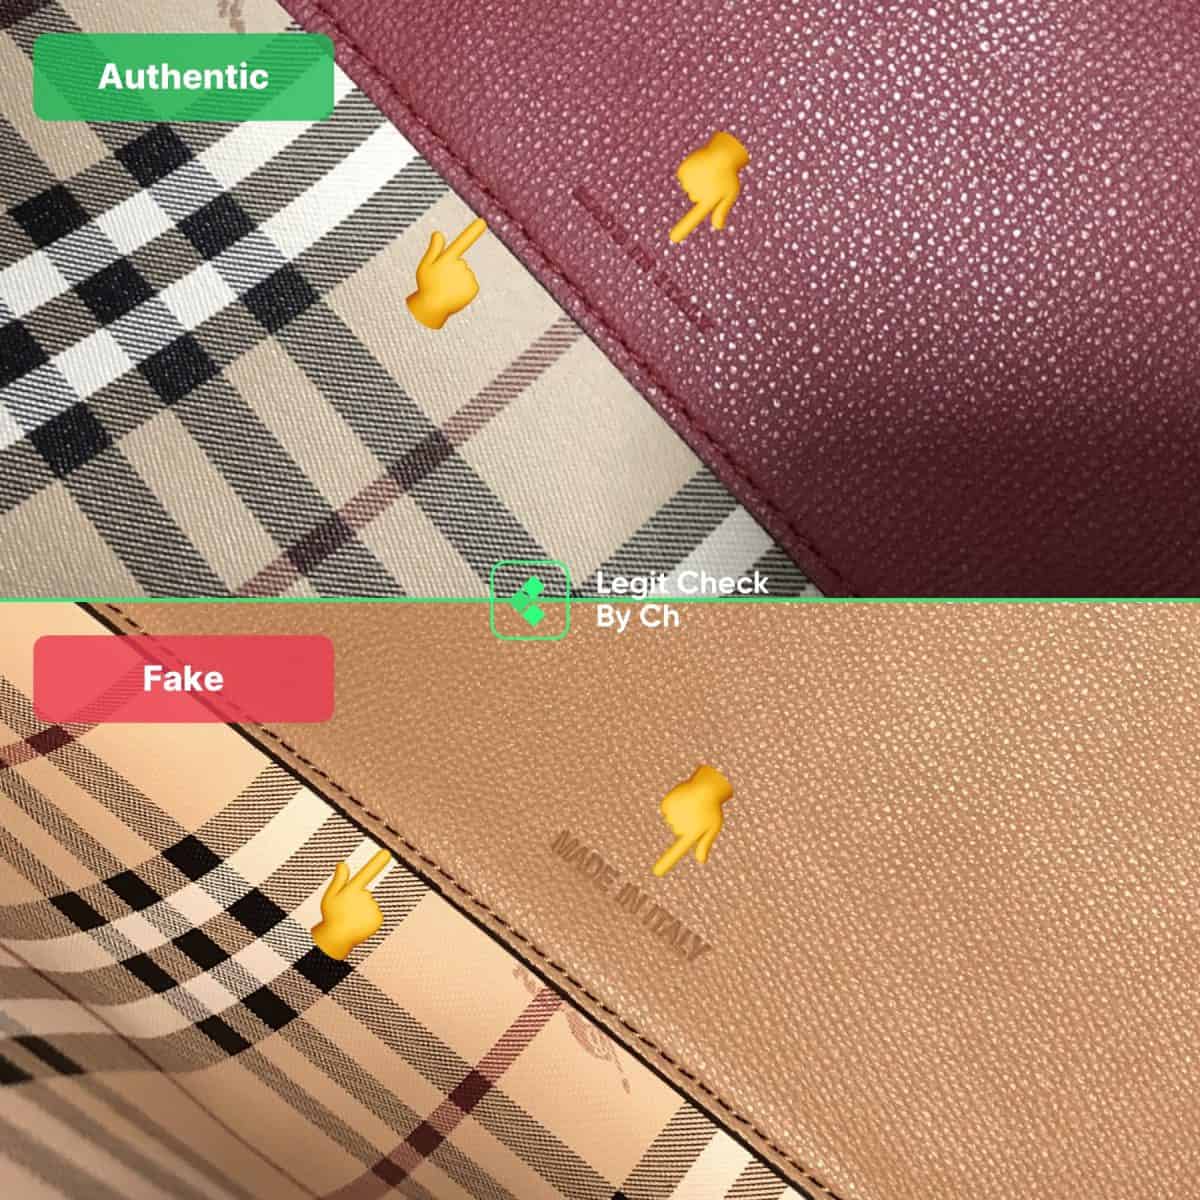 burberry lavenby authenticity check guide